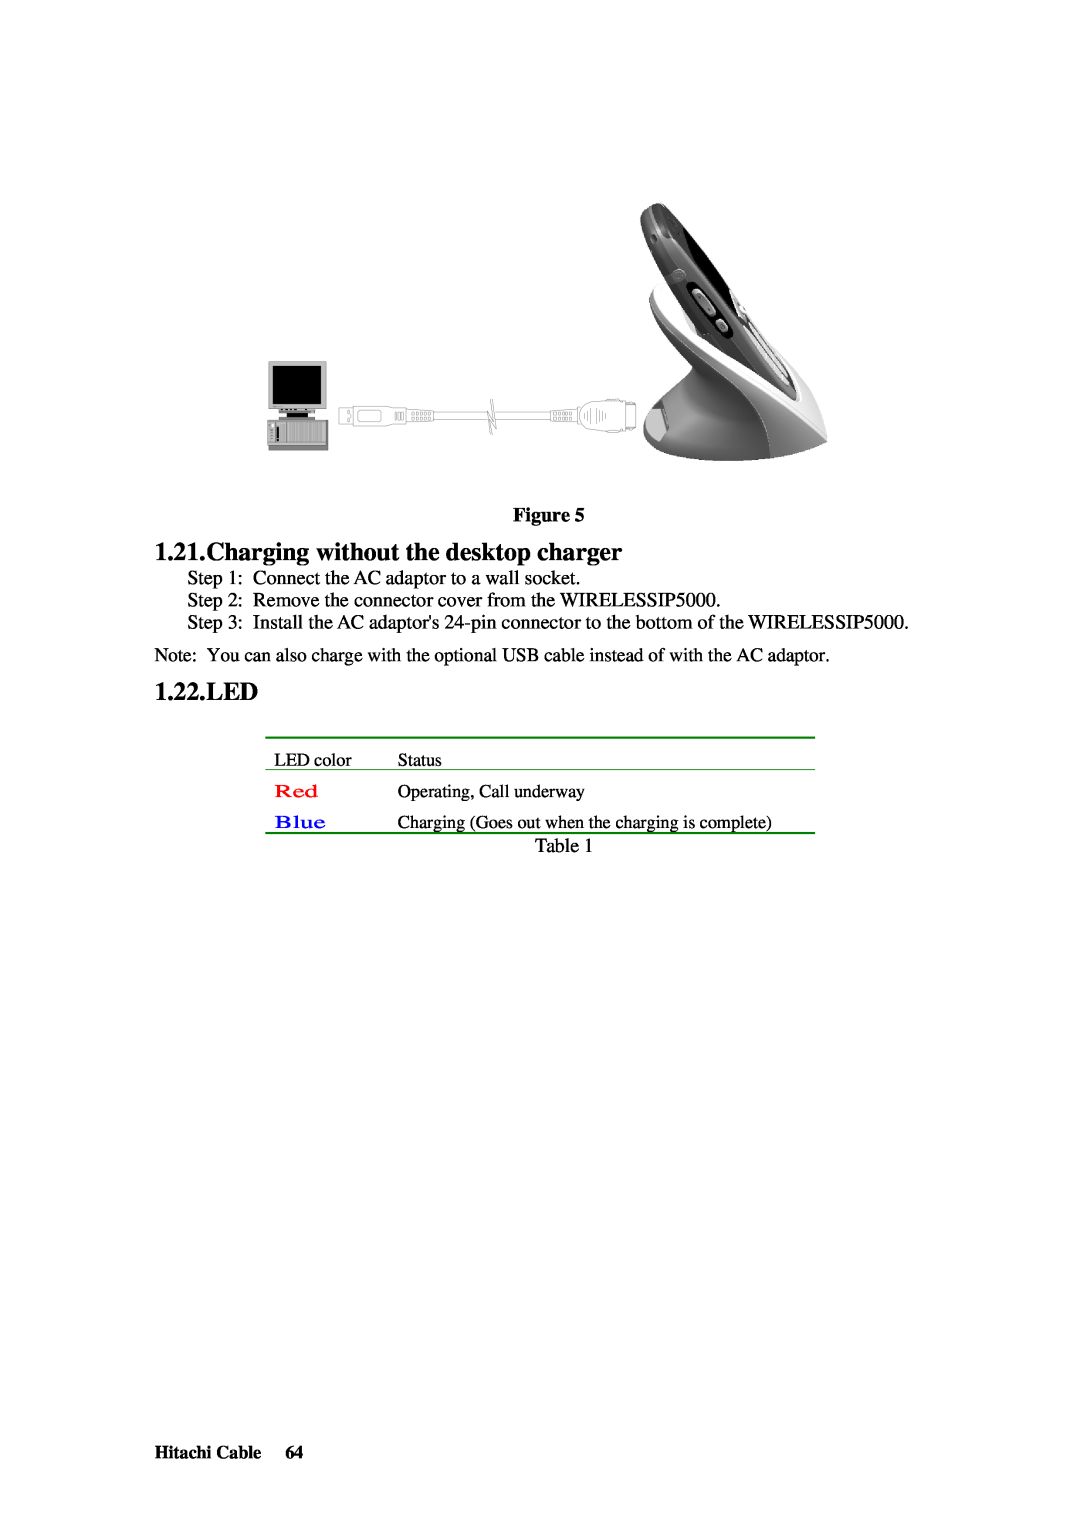 Hitachi TD61-2472 user manual Charging without the desktop charger, 1.22.LED, Connect the AC adaptor to a wall socket, Blue 